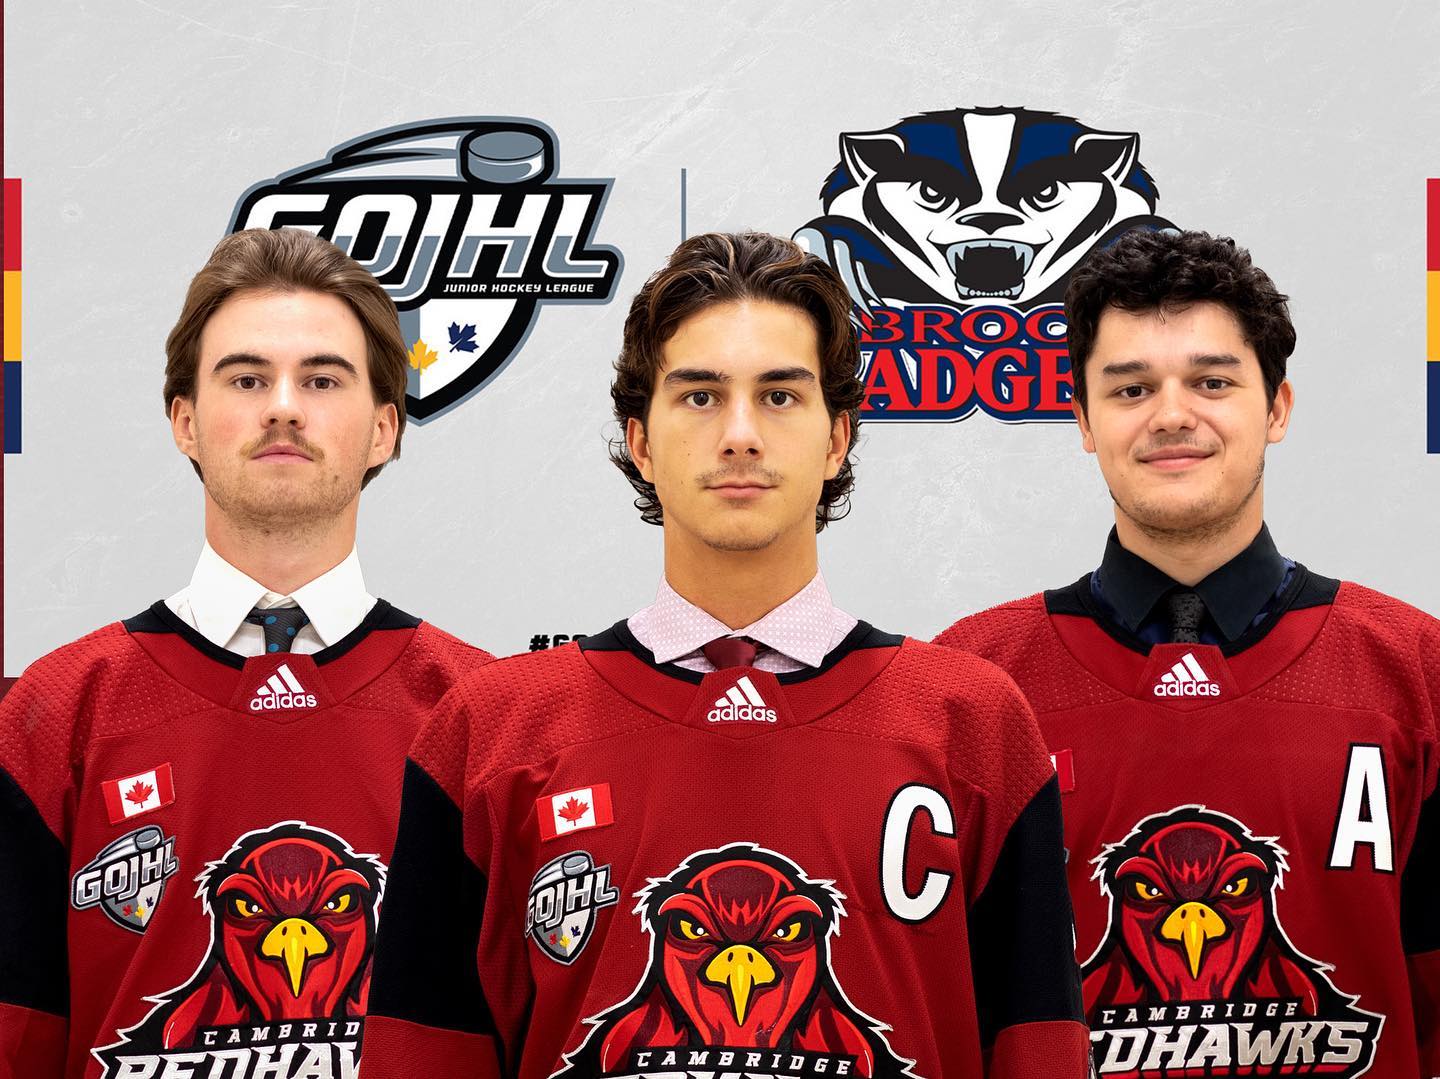 A few of our ‘02s are heading to Thorold today to join the GOJHL All Star team put together to matchup against the @brockmenshockey 

Good luck to Tanner, Andrew and Joseph this evening! 🏒

#RedHawksRiseUp